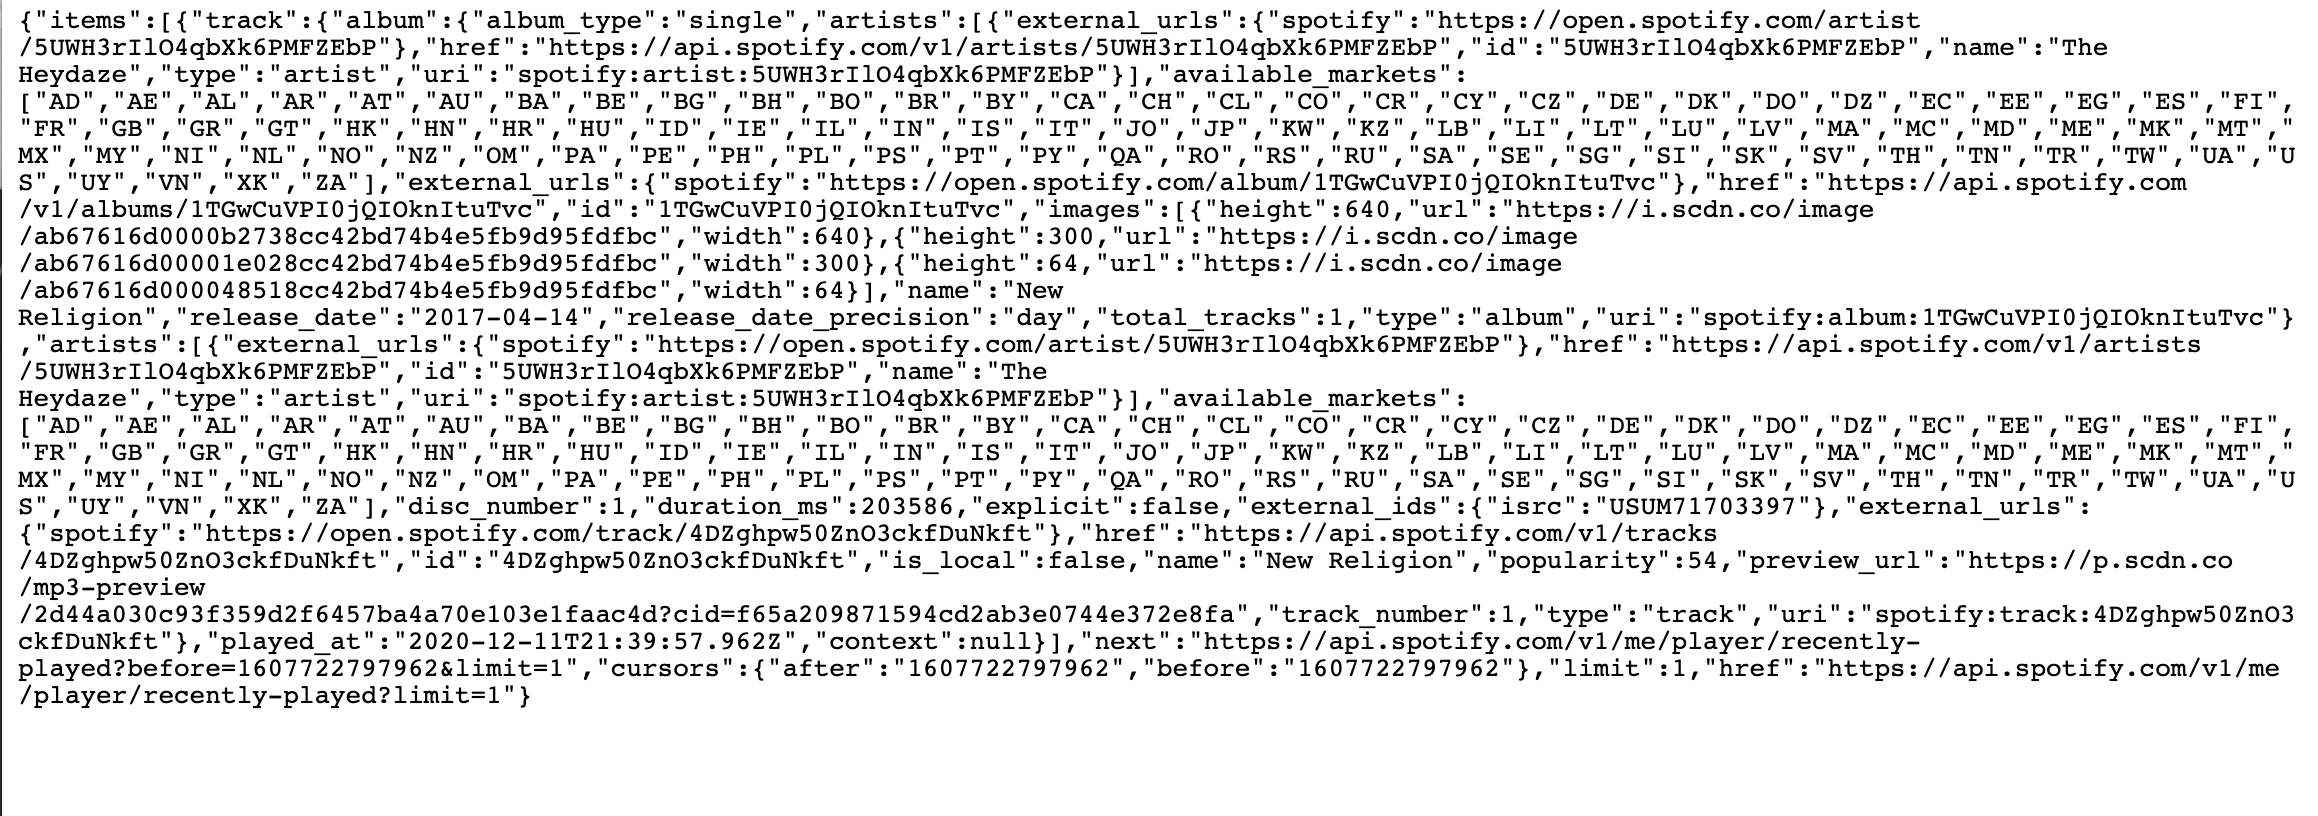 A screenshot of the large JSON block that Spotify responds to our request with.